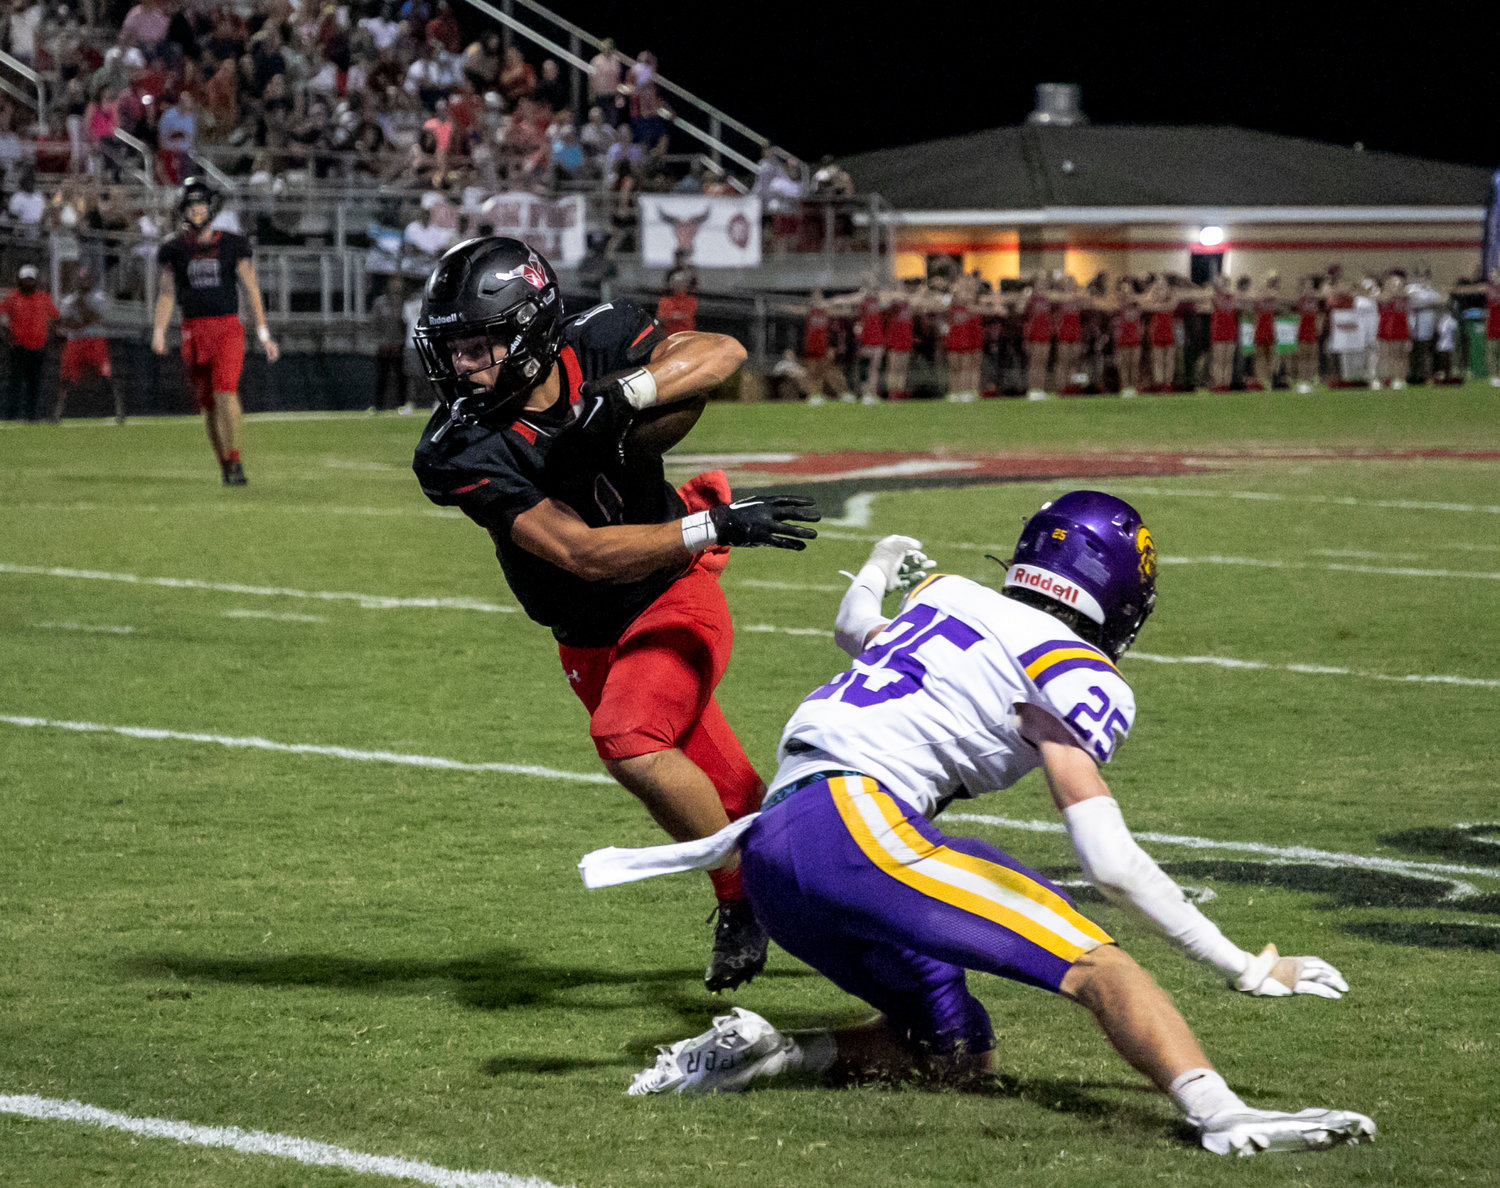 Spanish Fort senior Jacob Godfrey sheds a tackle during the Toros non-region rivalry game against the Daphne Trojans Sept. 23 at Spanish Fort Stadium. Godfrey was recently recognized as a student-athlete of the week alongside Toro junior Alexis Belarmino at the U.S. Sports Academy banquet last Thursday.